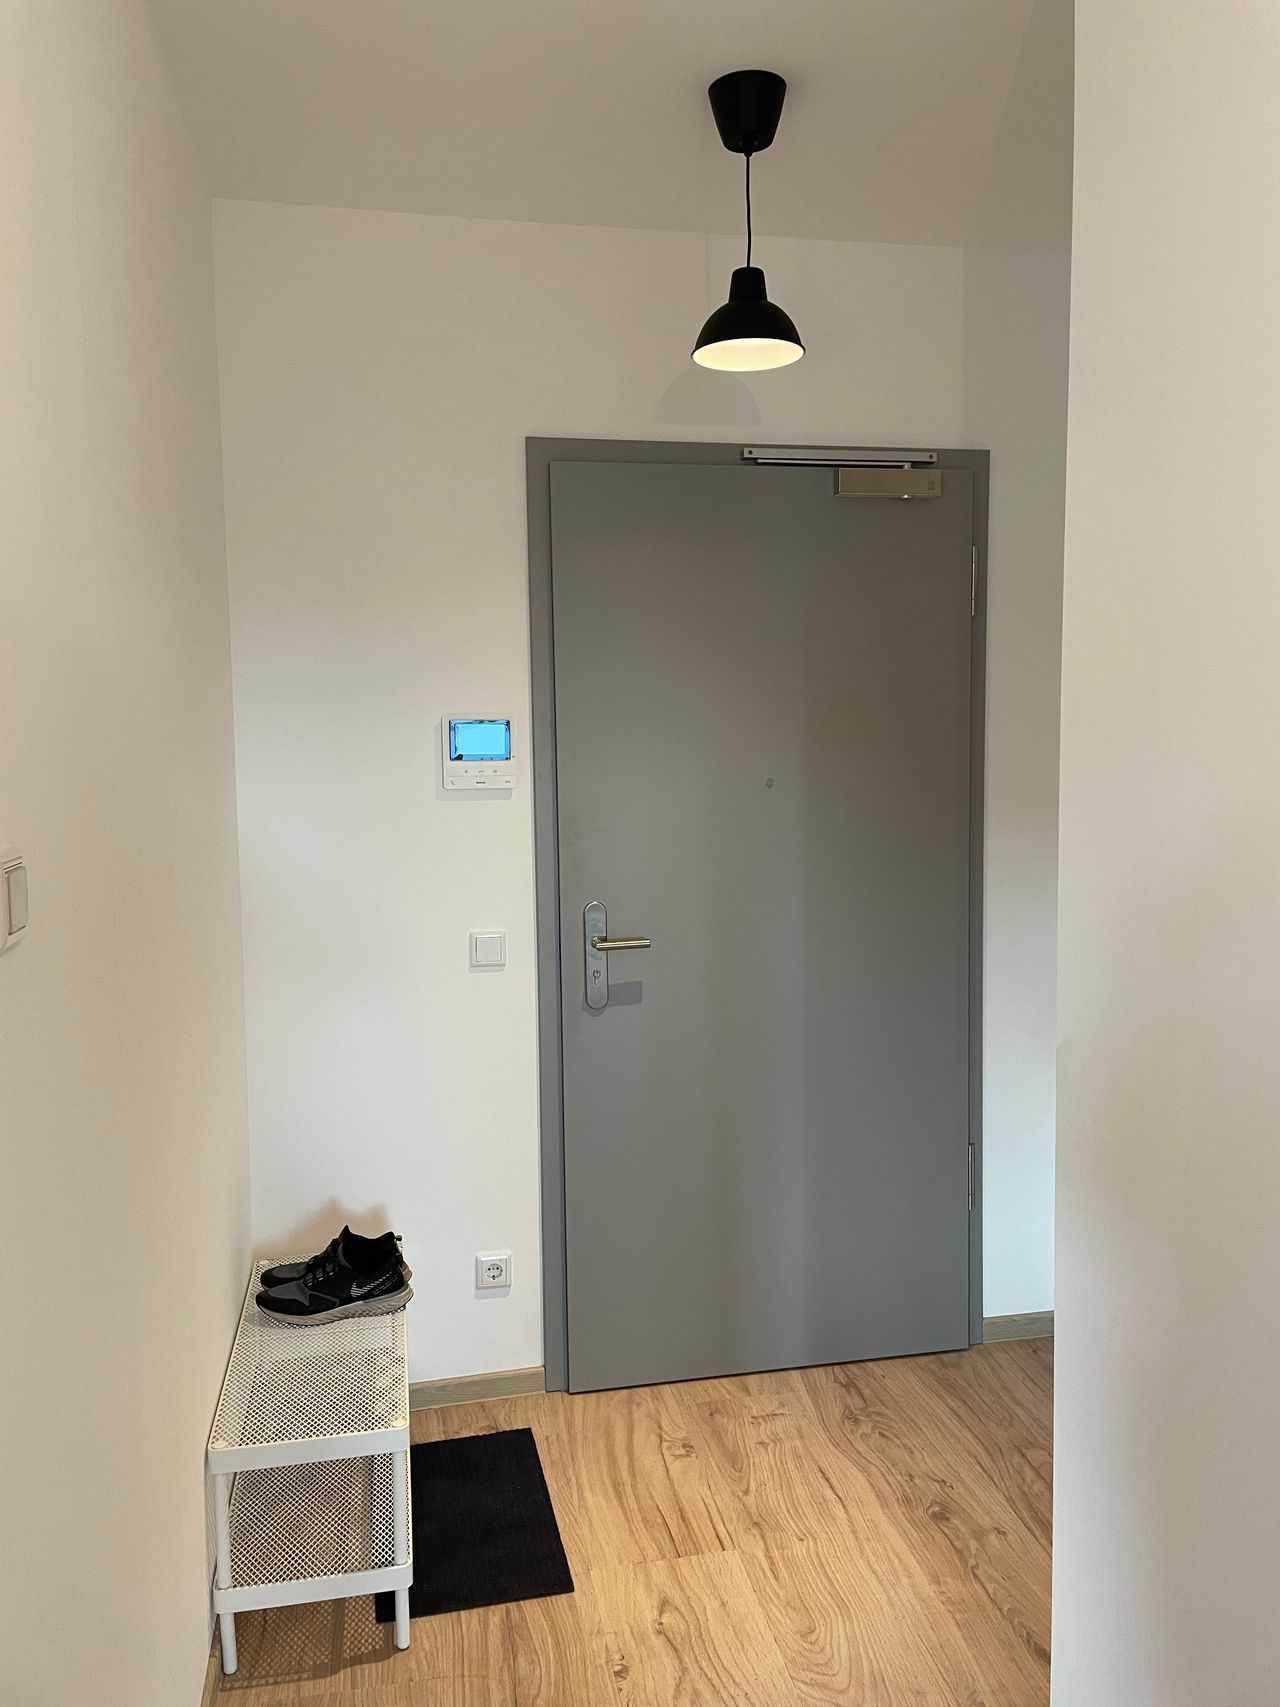 Very central and modern 2-room flat (5 min to central station) in a cozy neighborhood (Sprengelkiez)